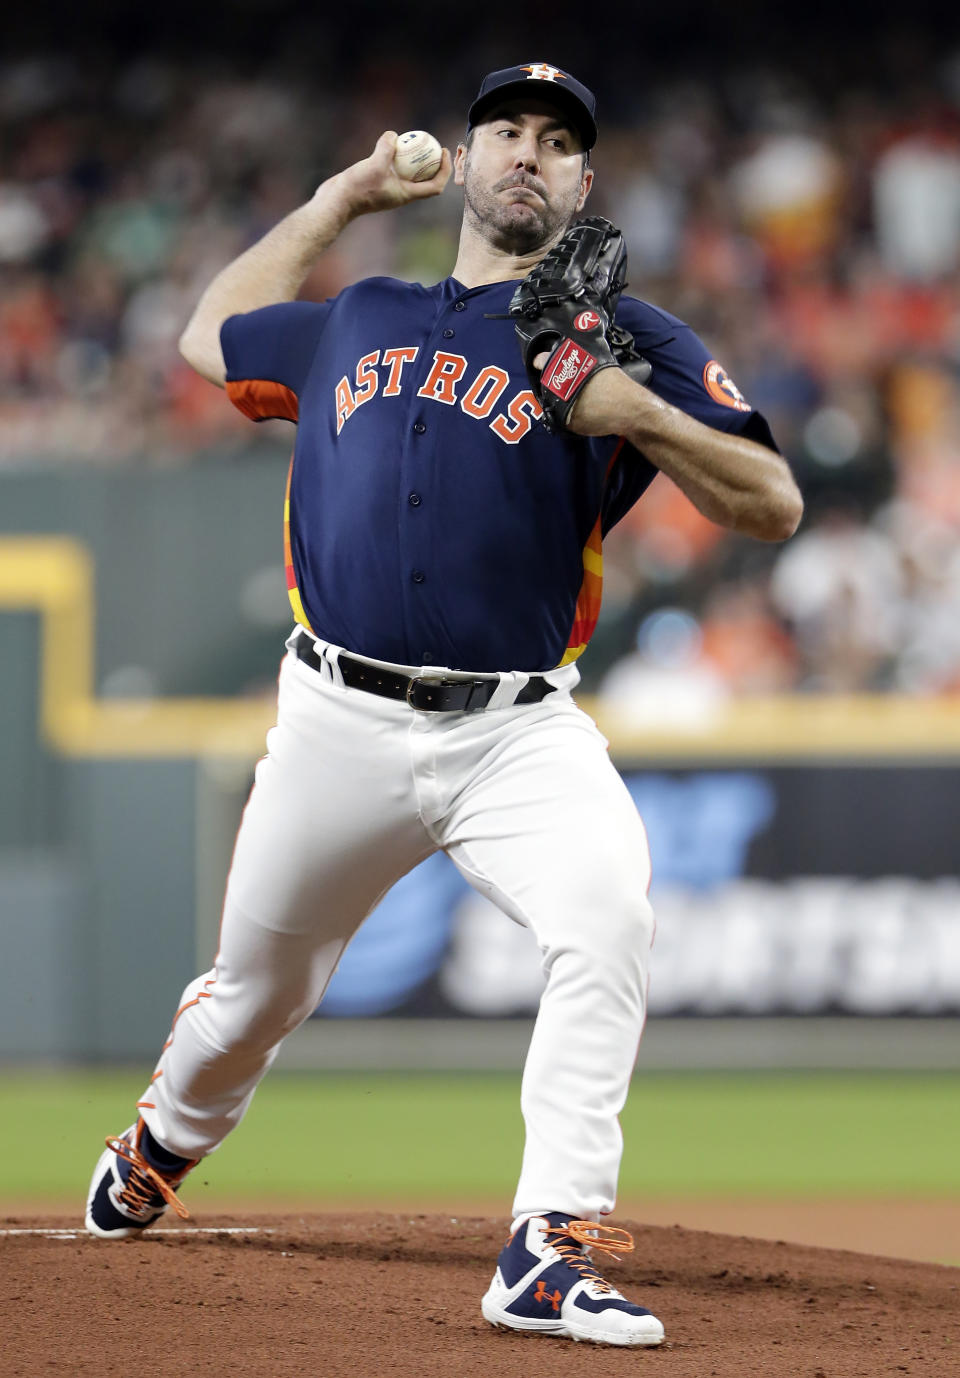 Houston Astros starting pitcher Justin Verlander throws during the first inning of a baseball game against the Seattle Mariners, Sunday, Aug. 4, 2019, in Houston. (AP Photo/Michael Wyke)